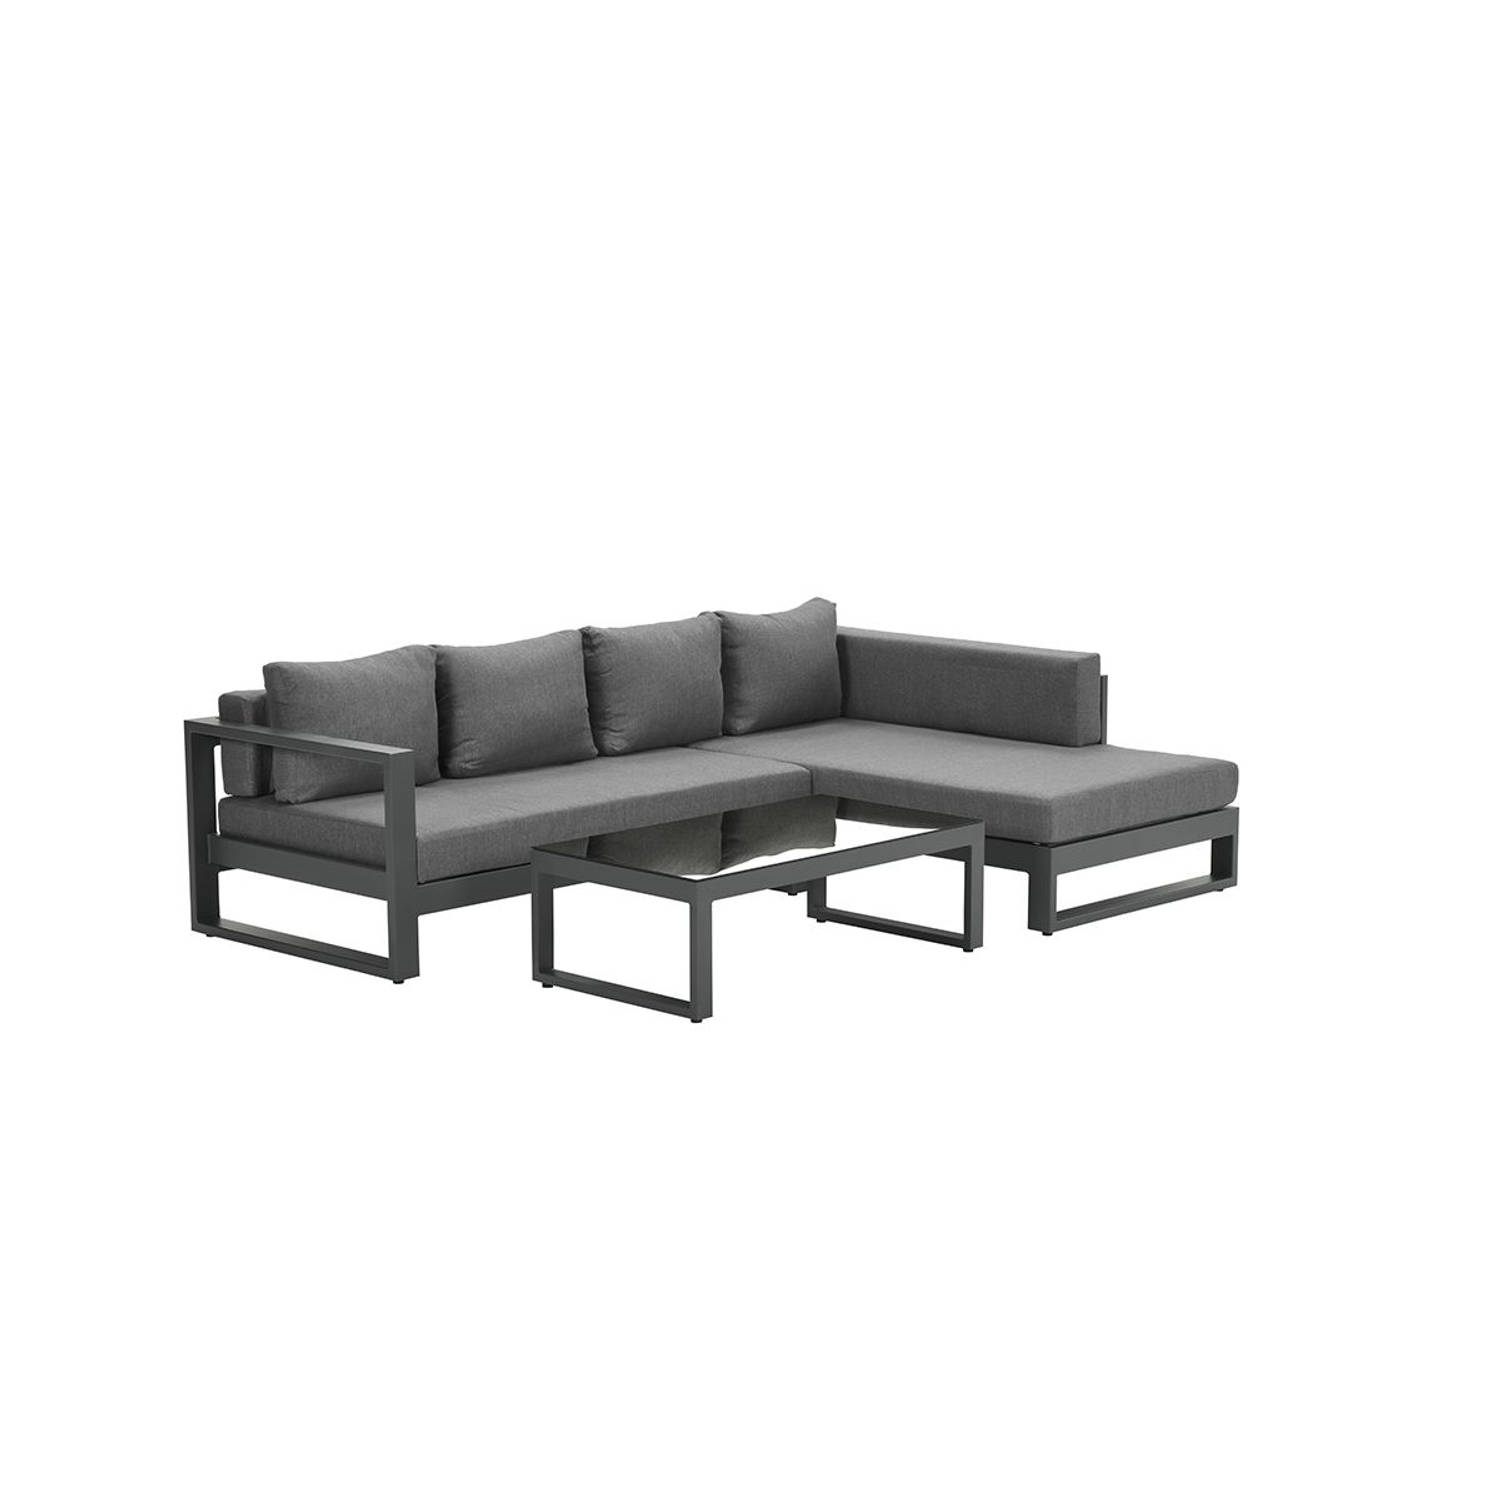 Garden Impressions Esmee chaise longue loungeset LINKS